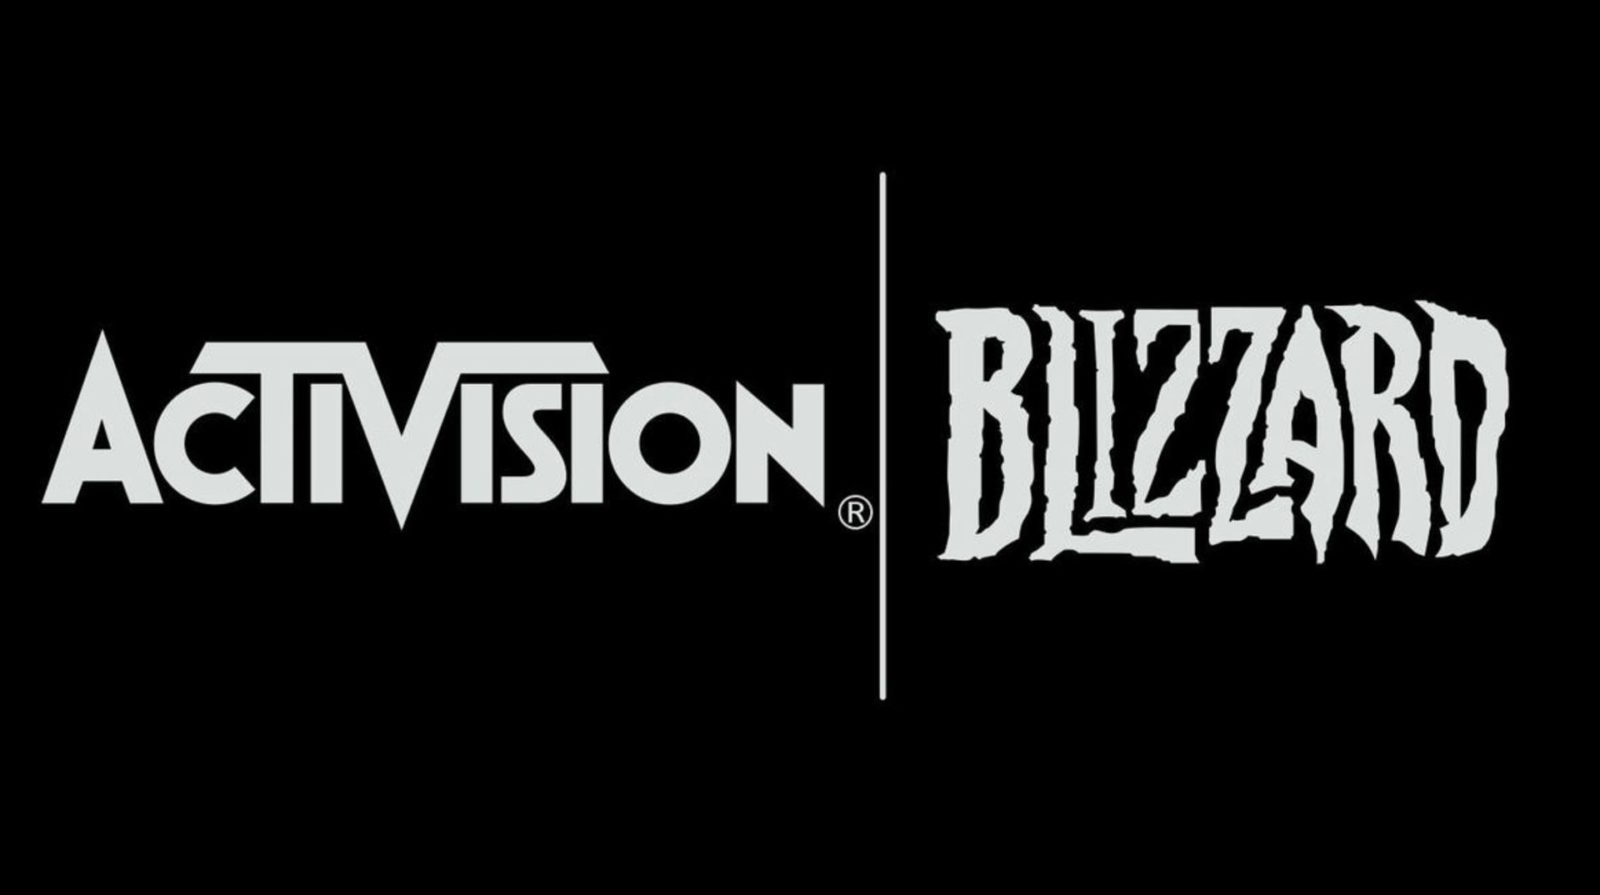 Activision Blizzard claims 20 employees ‘exited’ after harassment investigations started